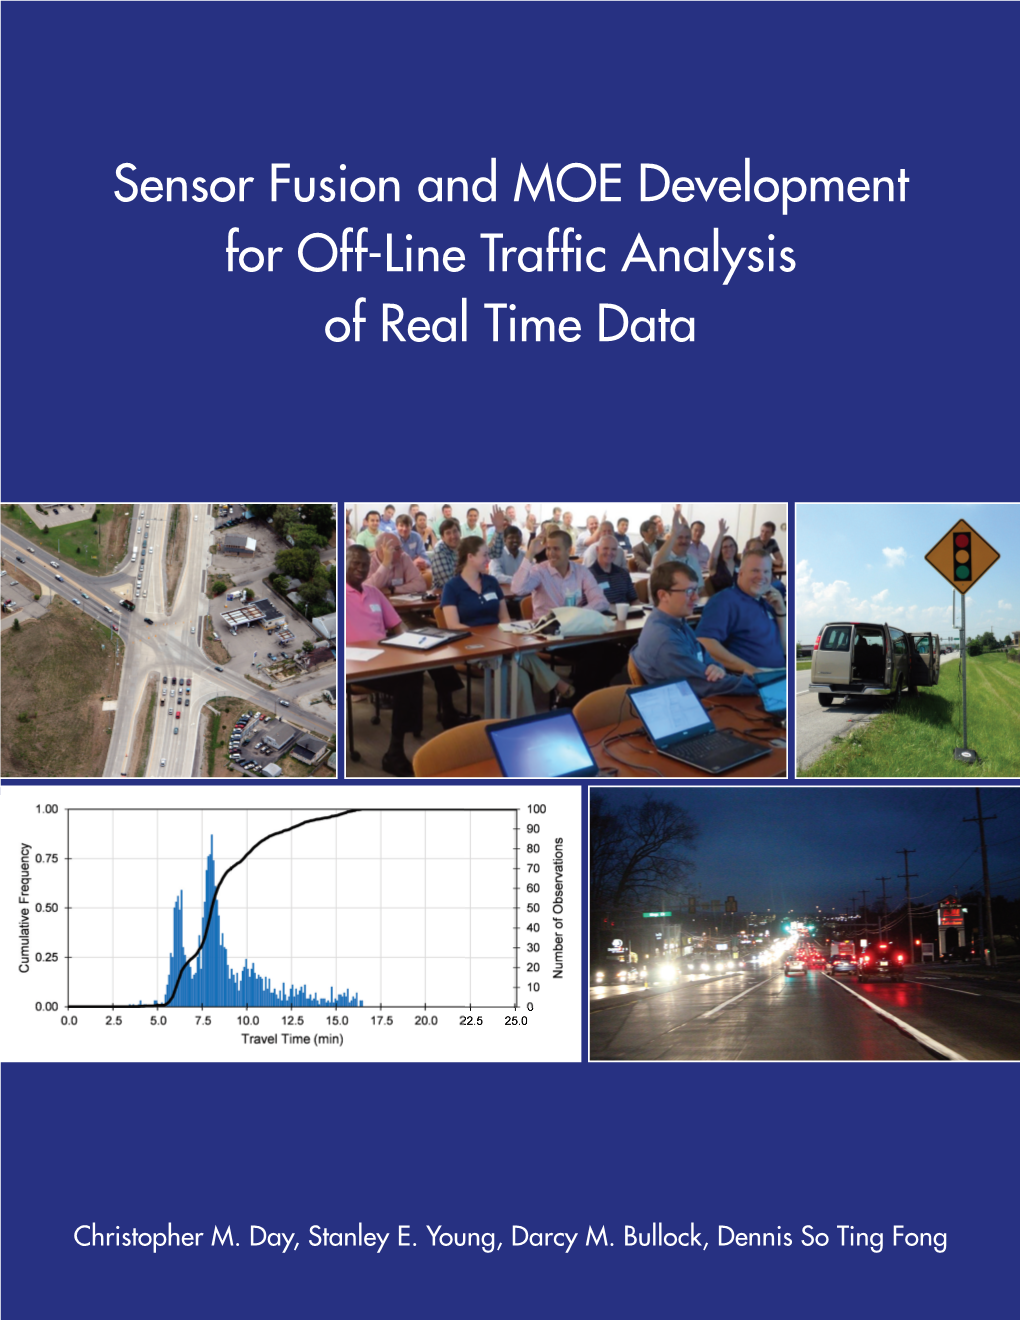 Sensor Fusion and MOE Development for Off-Line Traffic Analysis of Real Time Data